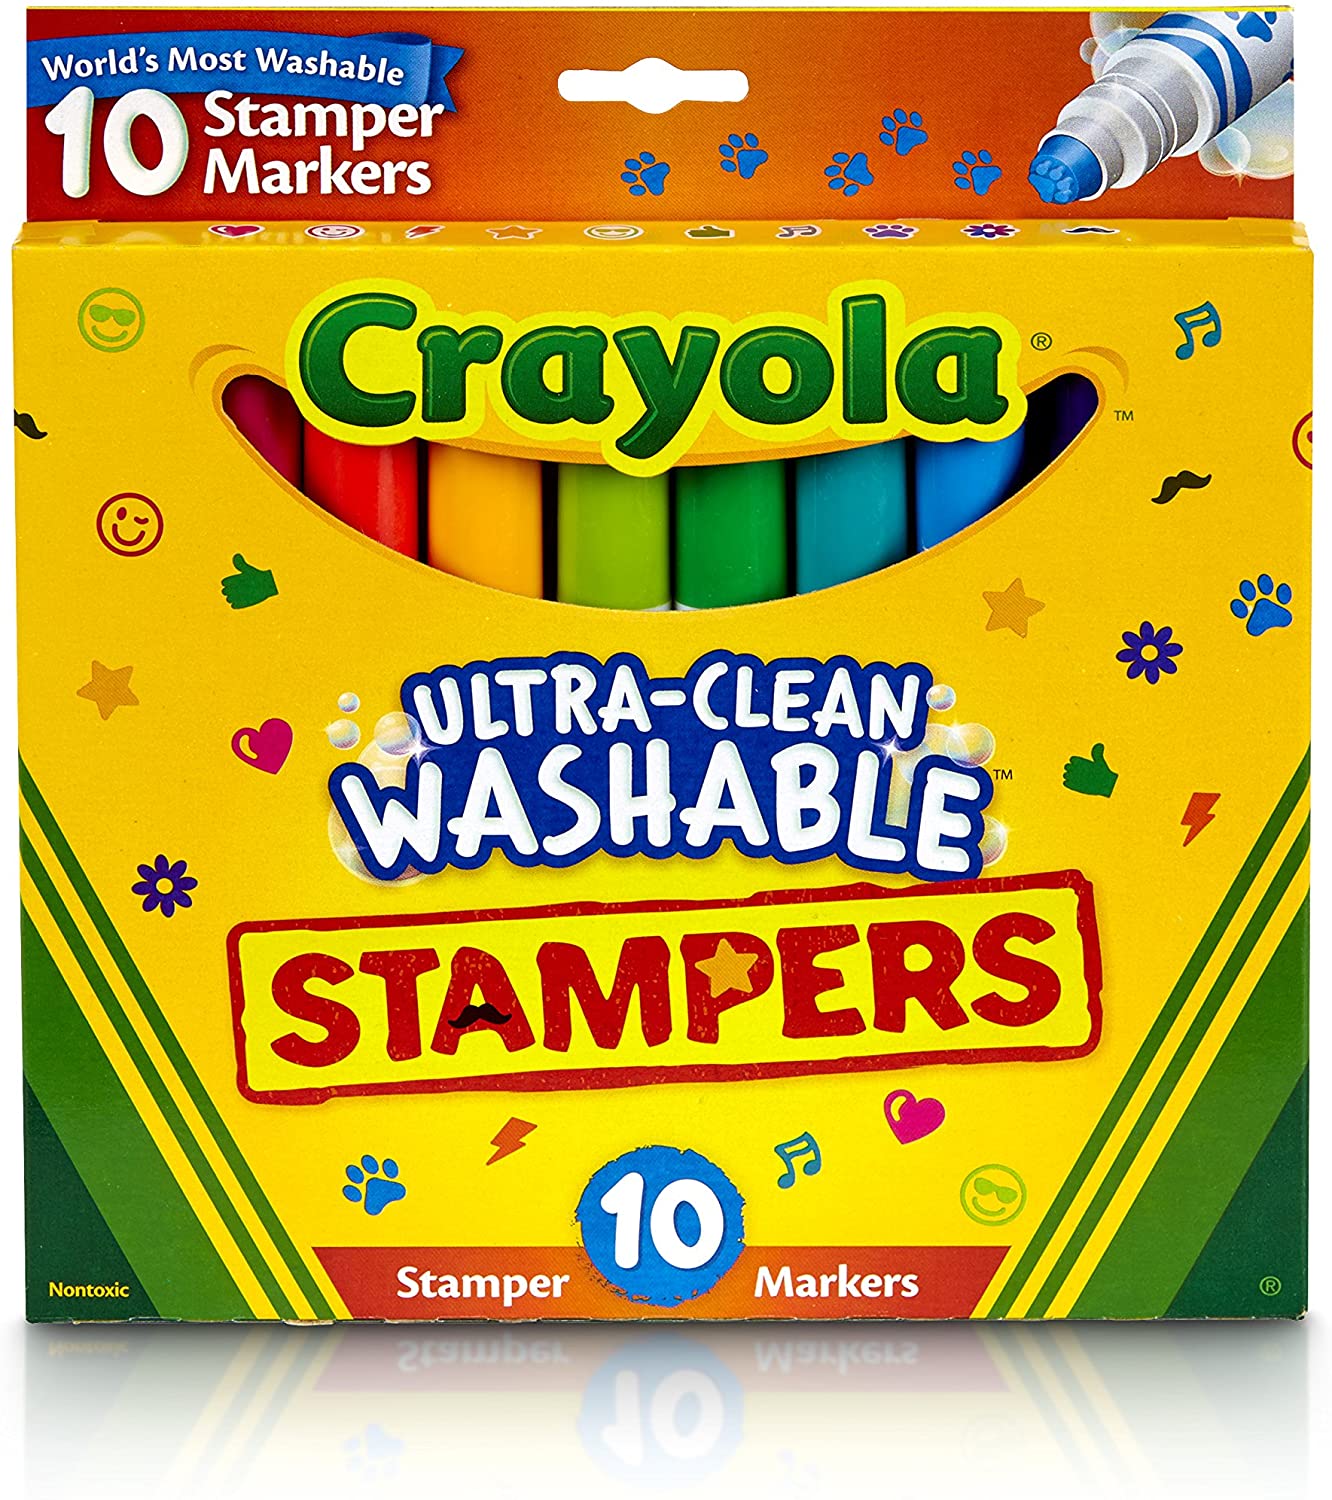 Crayola Super Tips Washable Markers, Fine Line, Assorted Colors, 10/Box  (58-8610)